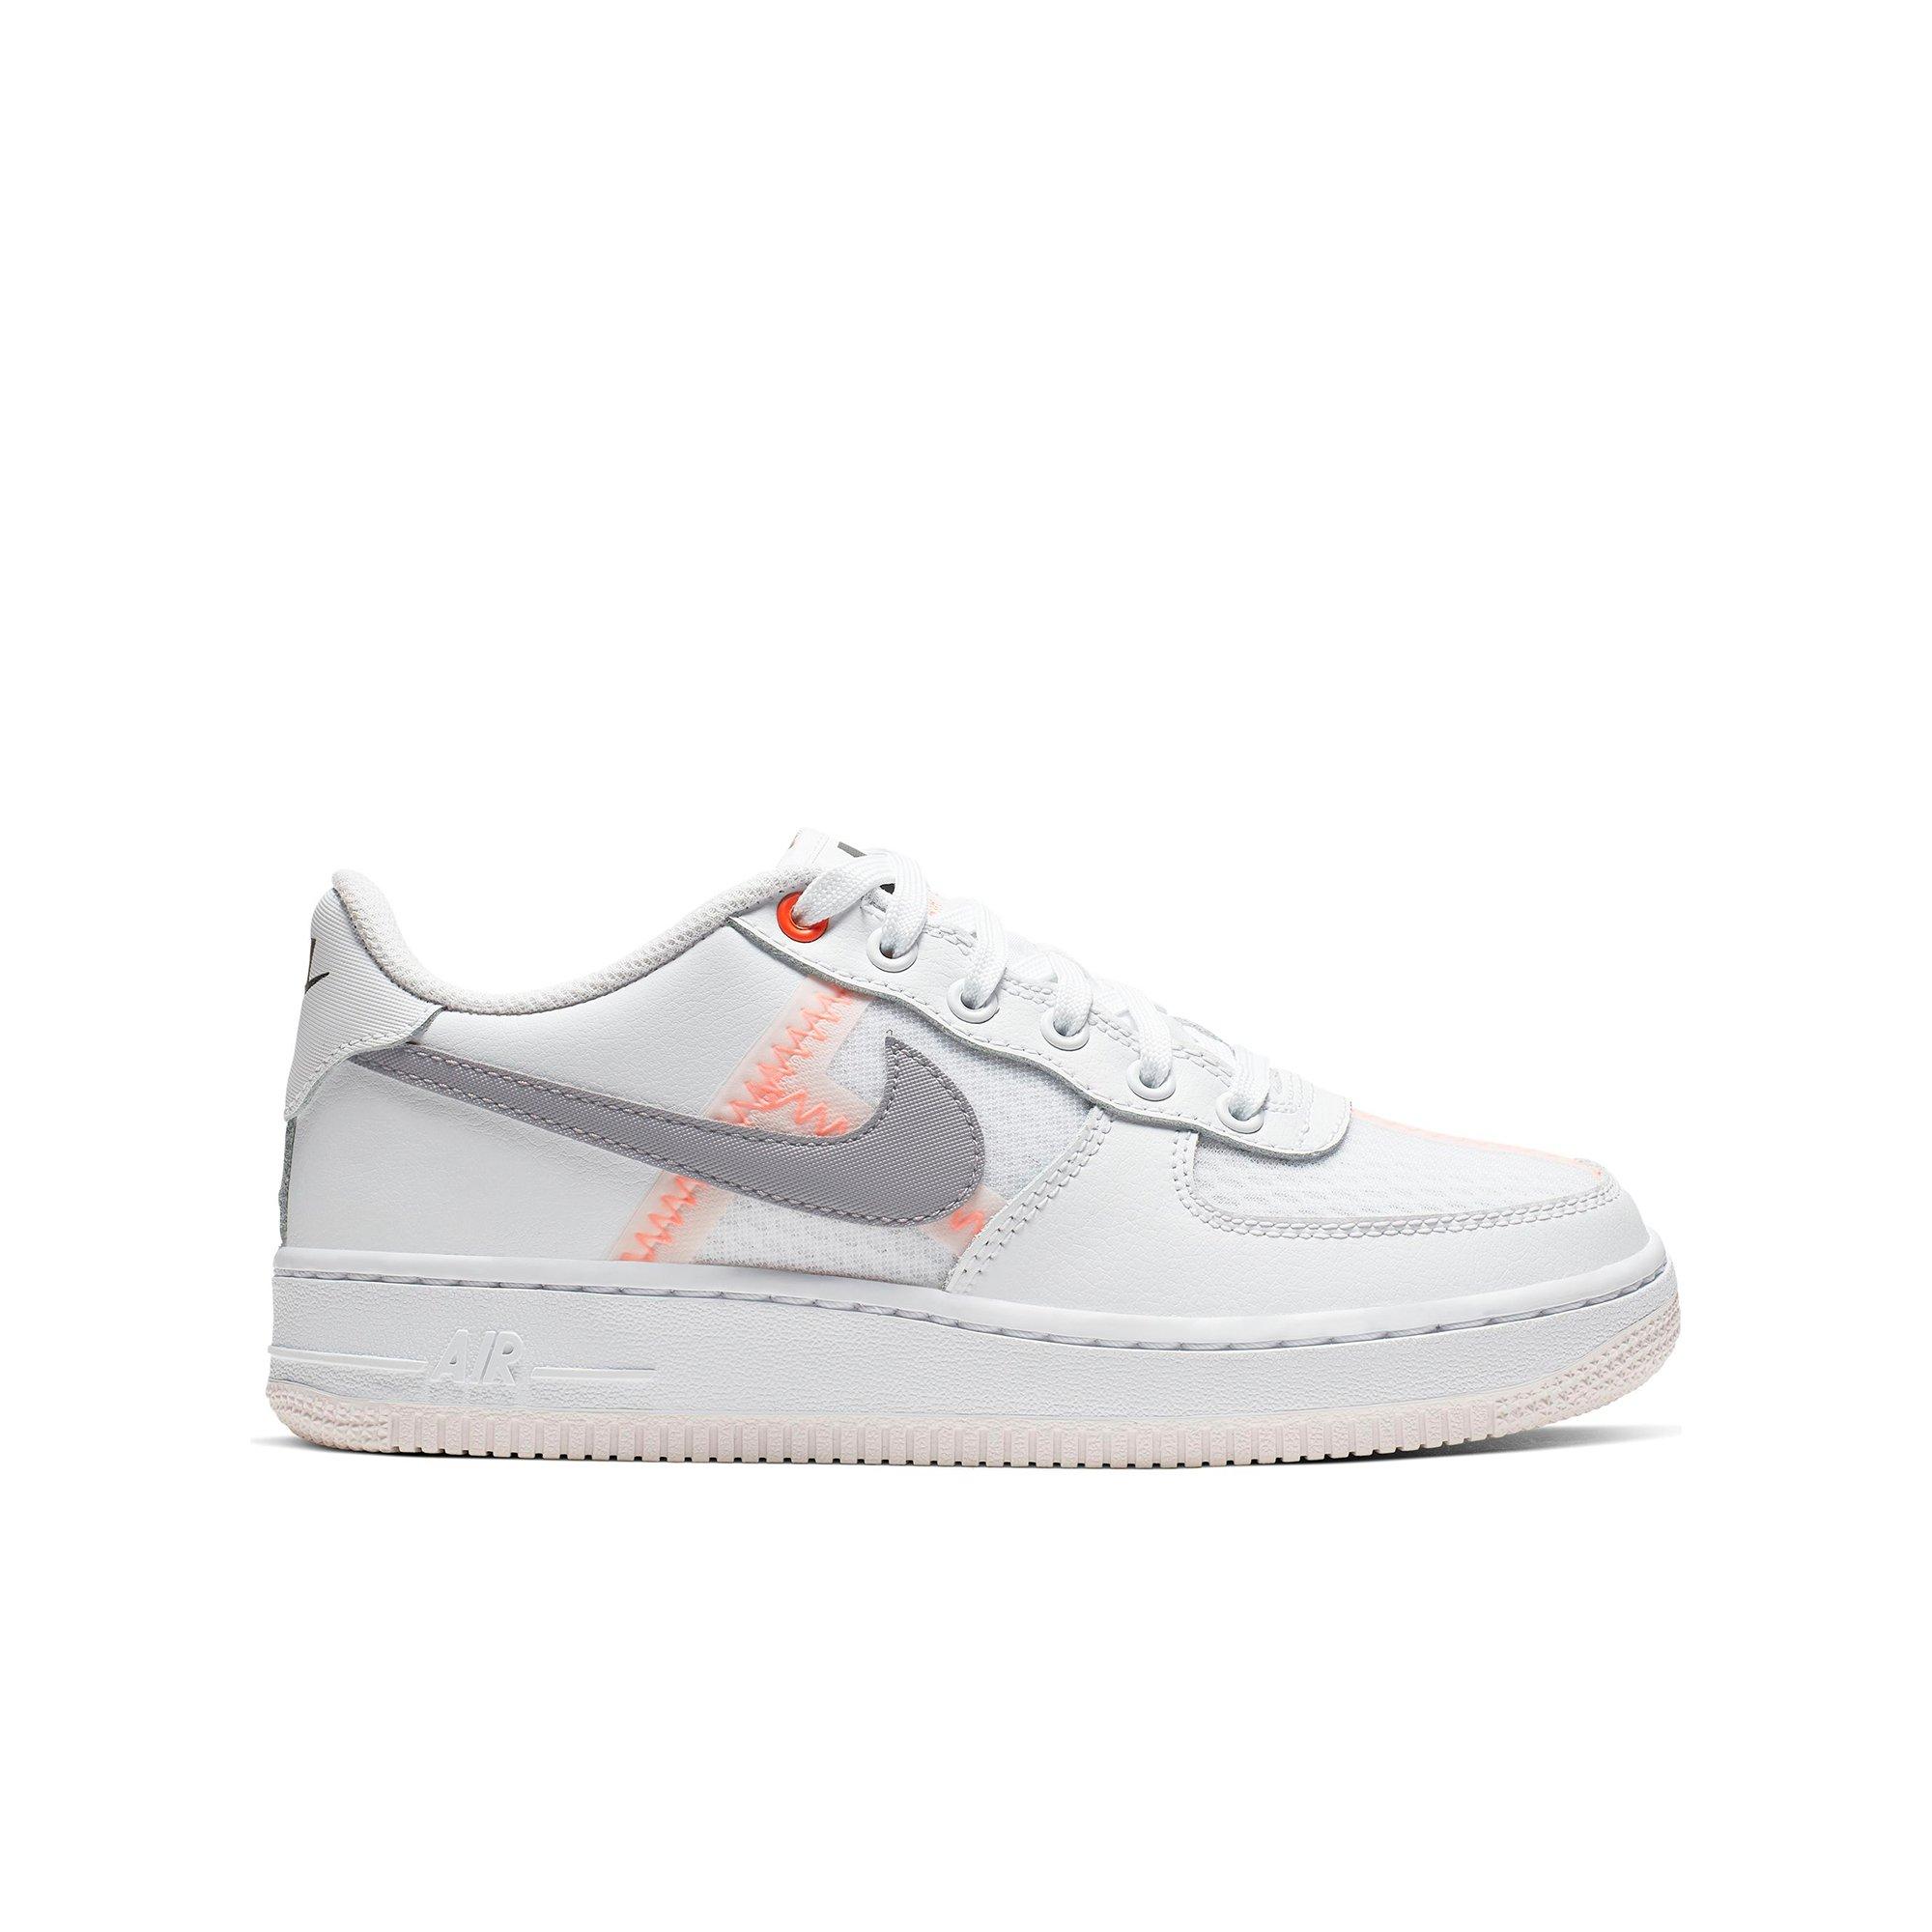 nike air force 1 pink and grey